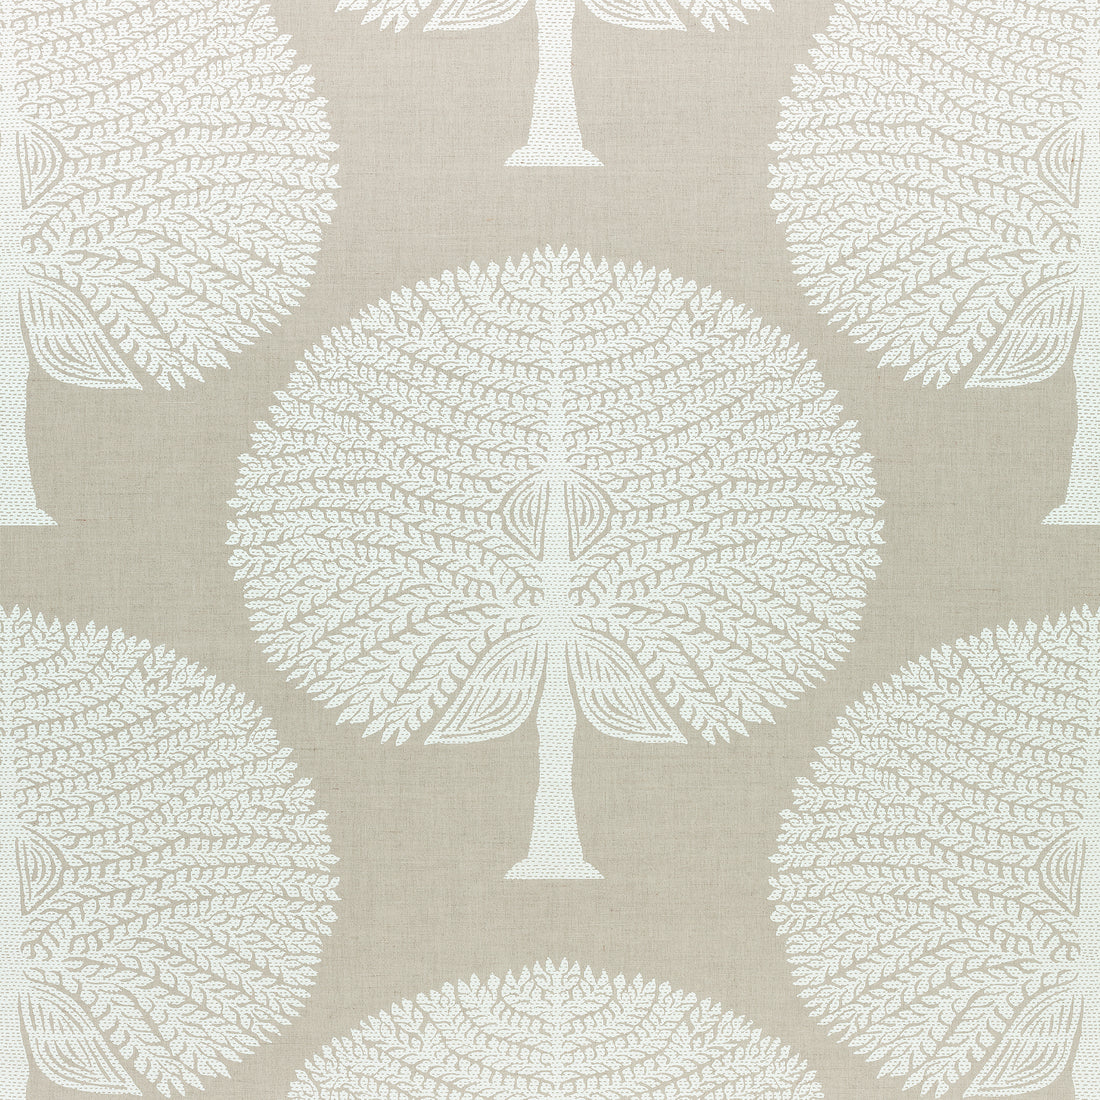 Mulberry Tree fabric in natural color - pattern number F910601 - by Thibaut in the Ceylon collection